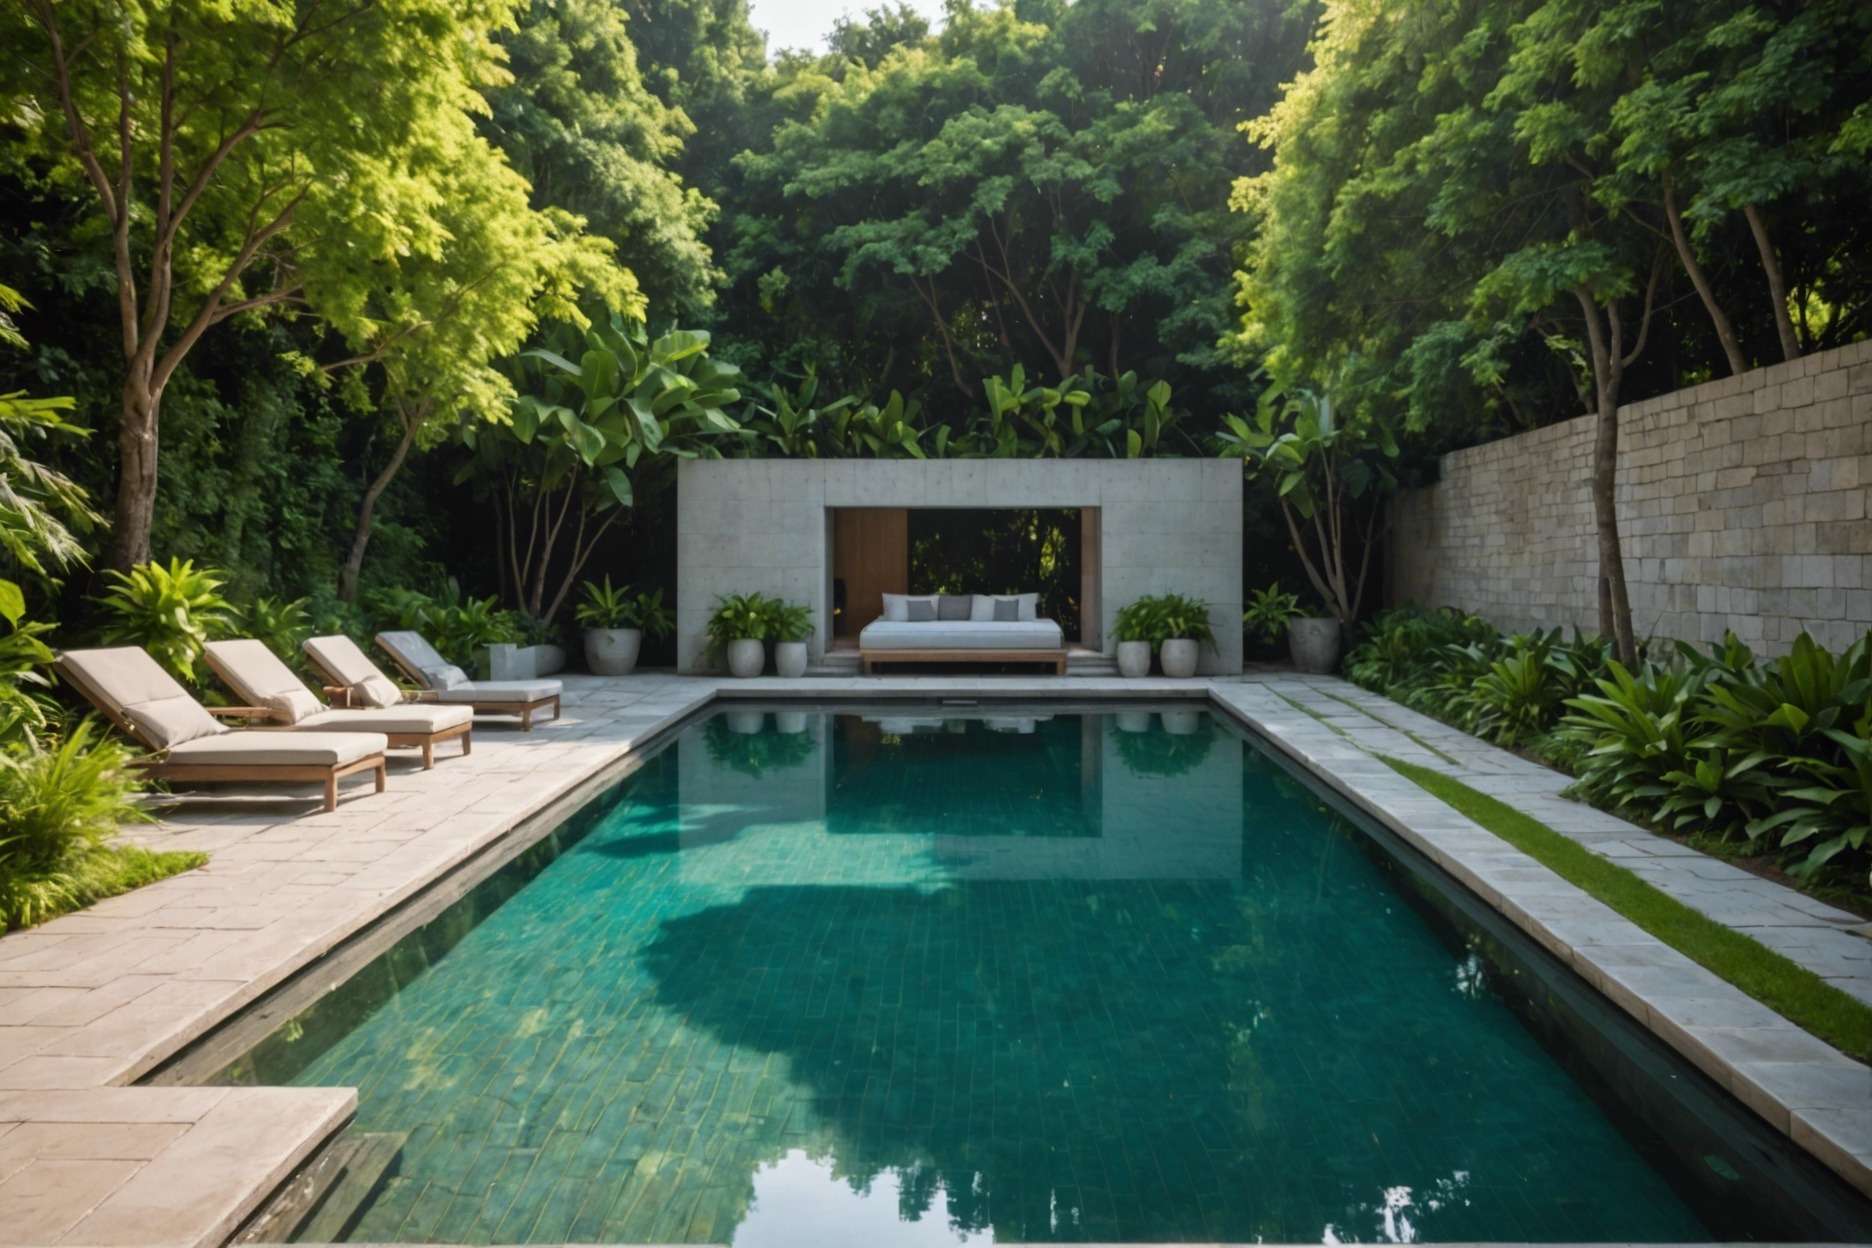 Aesthetic pool area with pavers and concrete sections, reflecting sunlight, surrounded by lush greenery